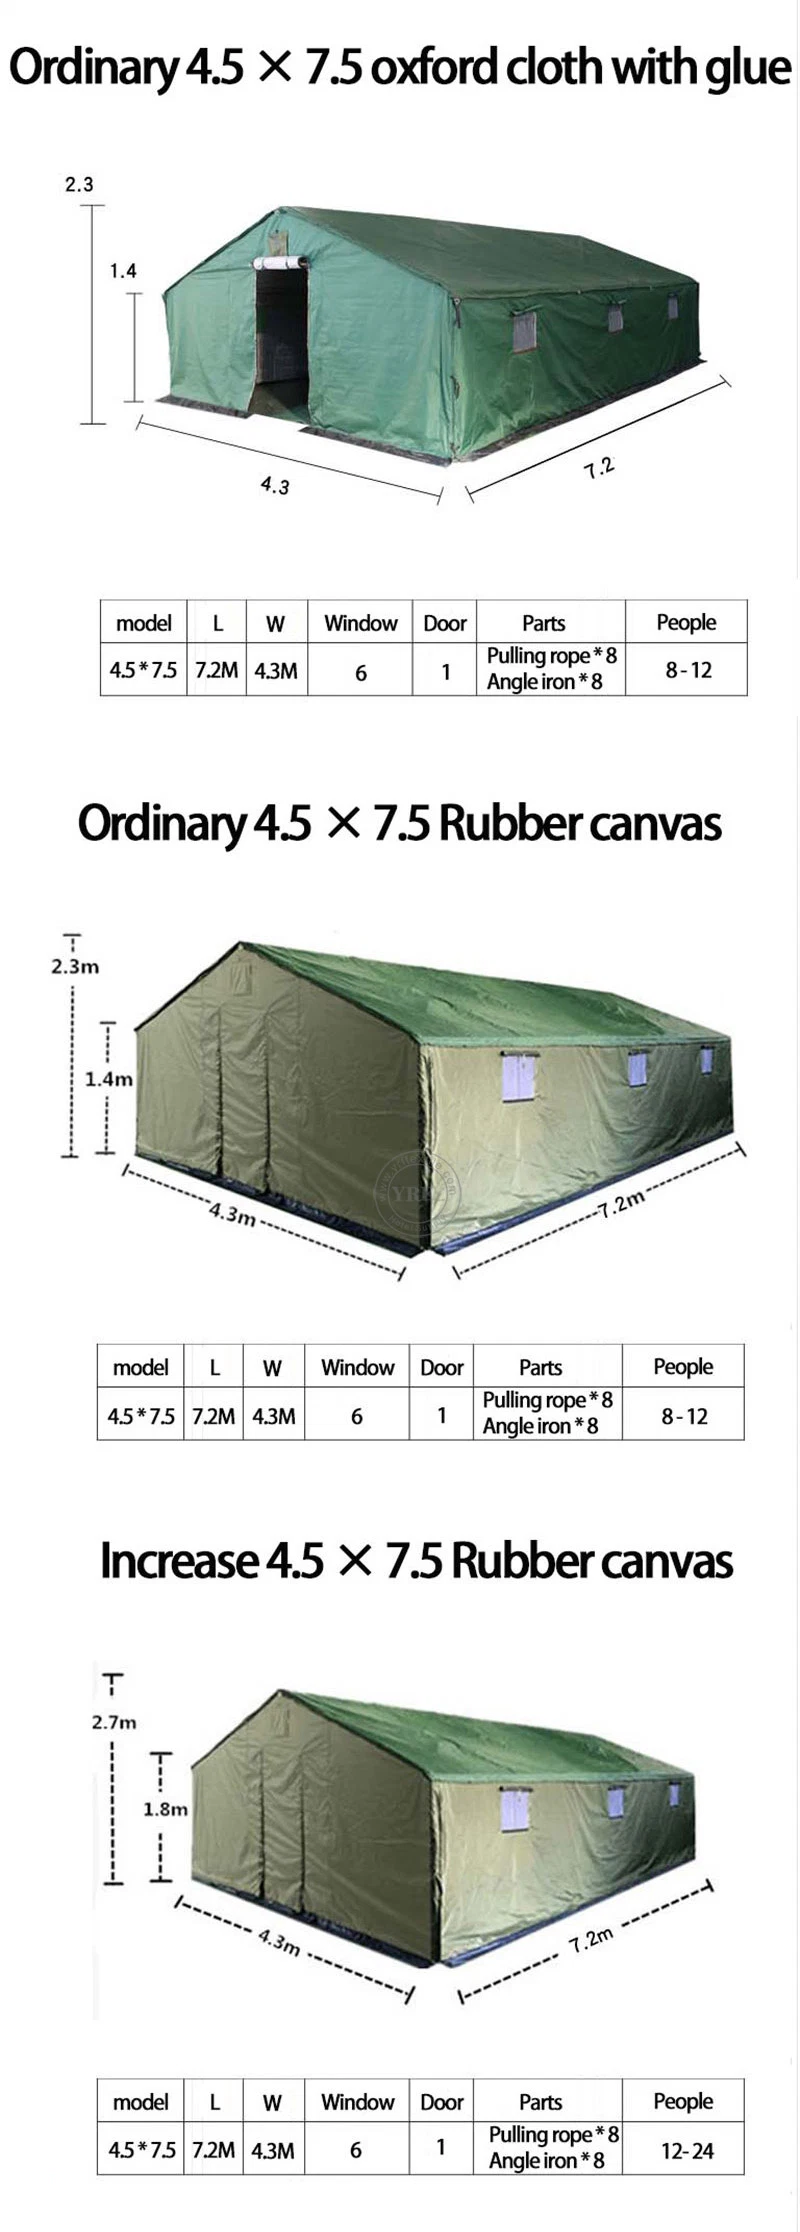 China Emergency Tent Relief Police Style Good Waterproof and Rainproof Performance Can Be Installed Quickly 28 Person Tents Lightweight Tent Cotton Tent